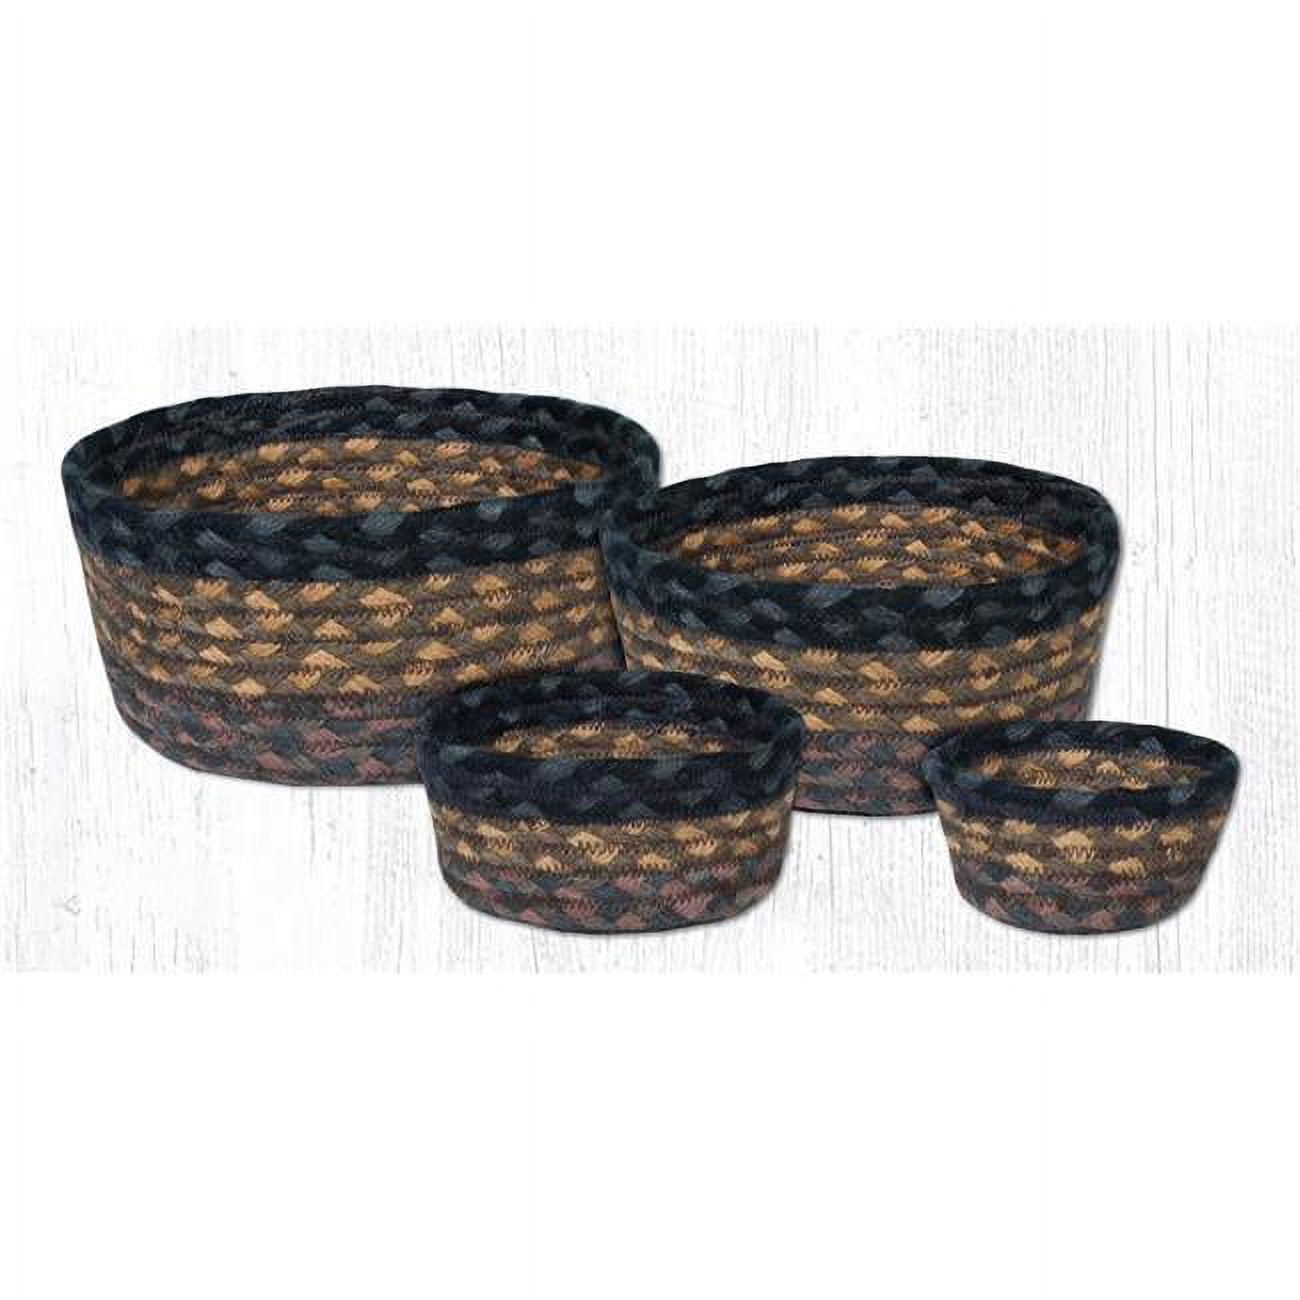 Capitol Importing 36-cb099 Jute Round Casserole Baskets - Brown, Black & Charcoal, Set Of 4